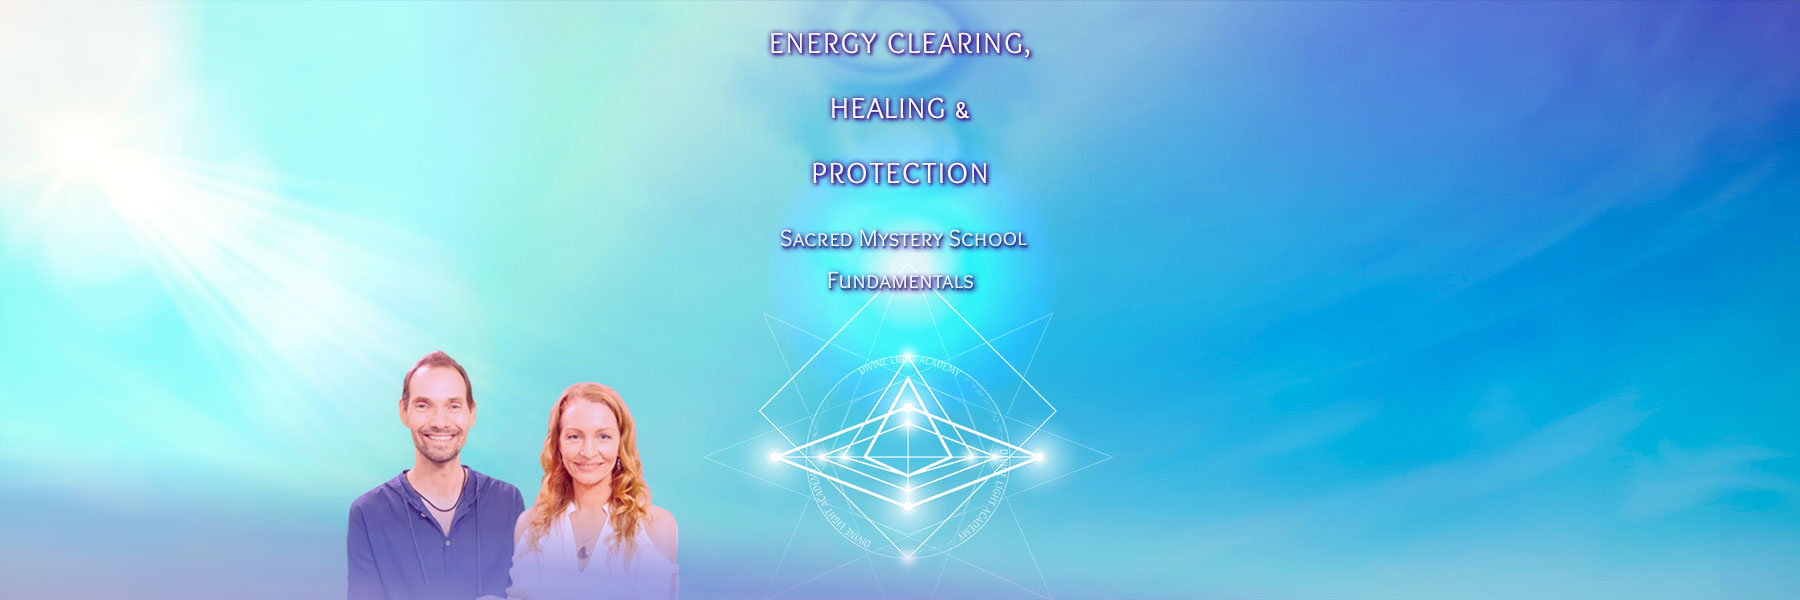 Energy Clearing, Healing & Protection - Advanced